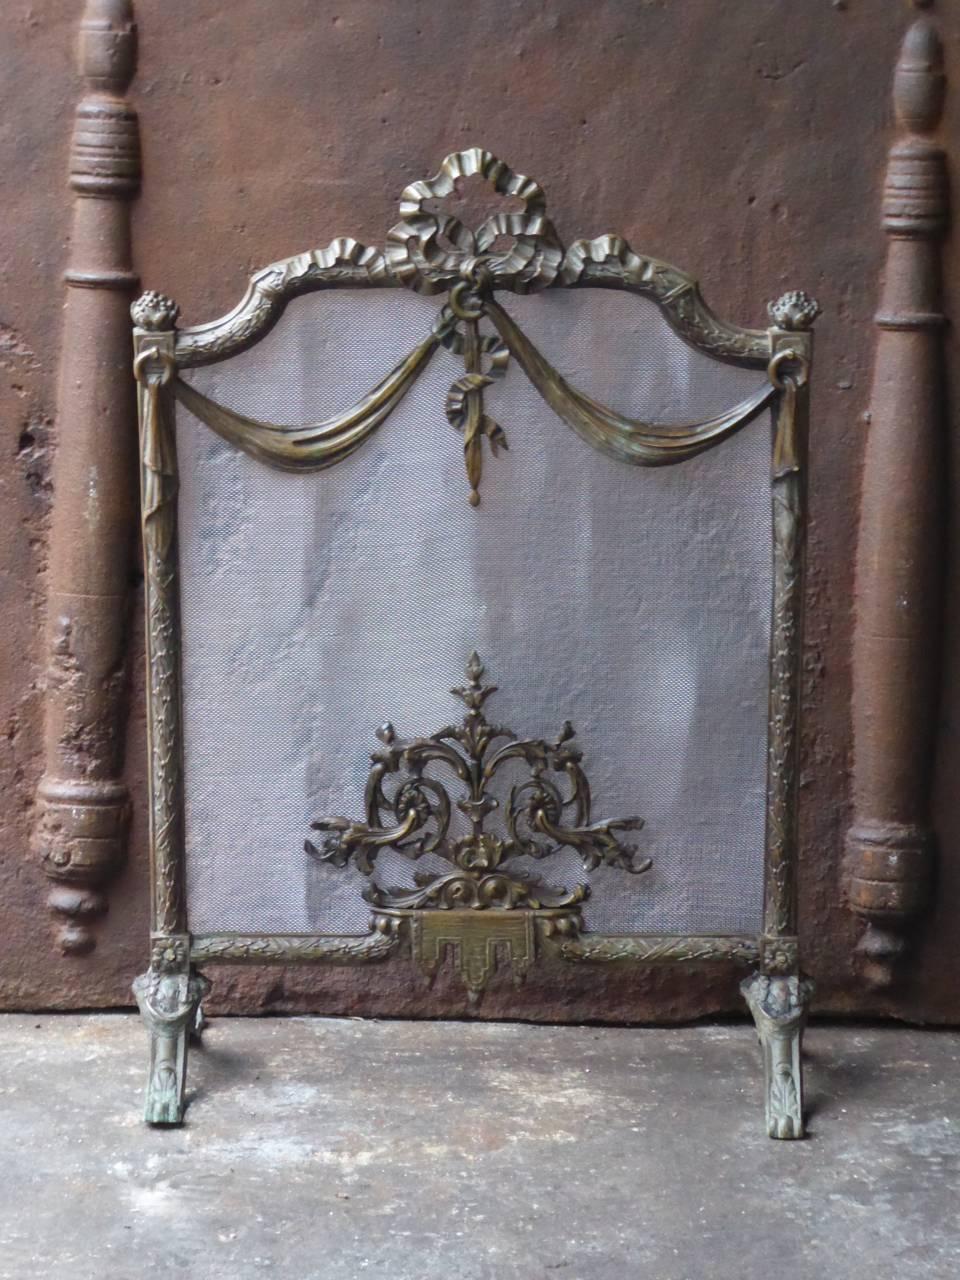 19th-20th century French fireplace screen made of brass and iron mesh.

